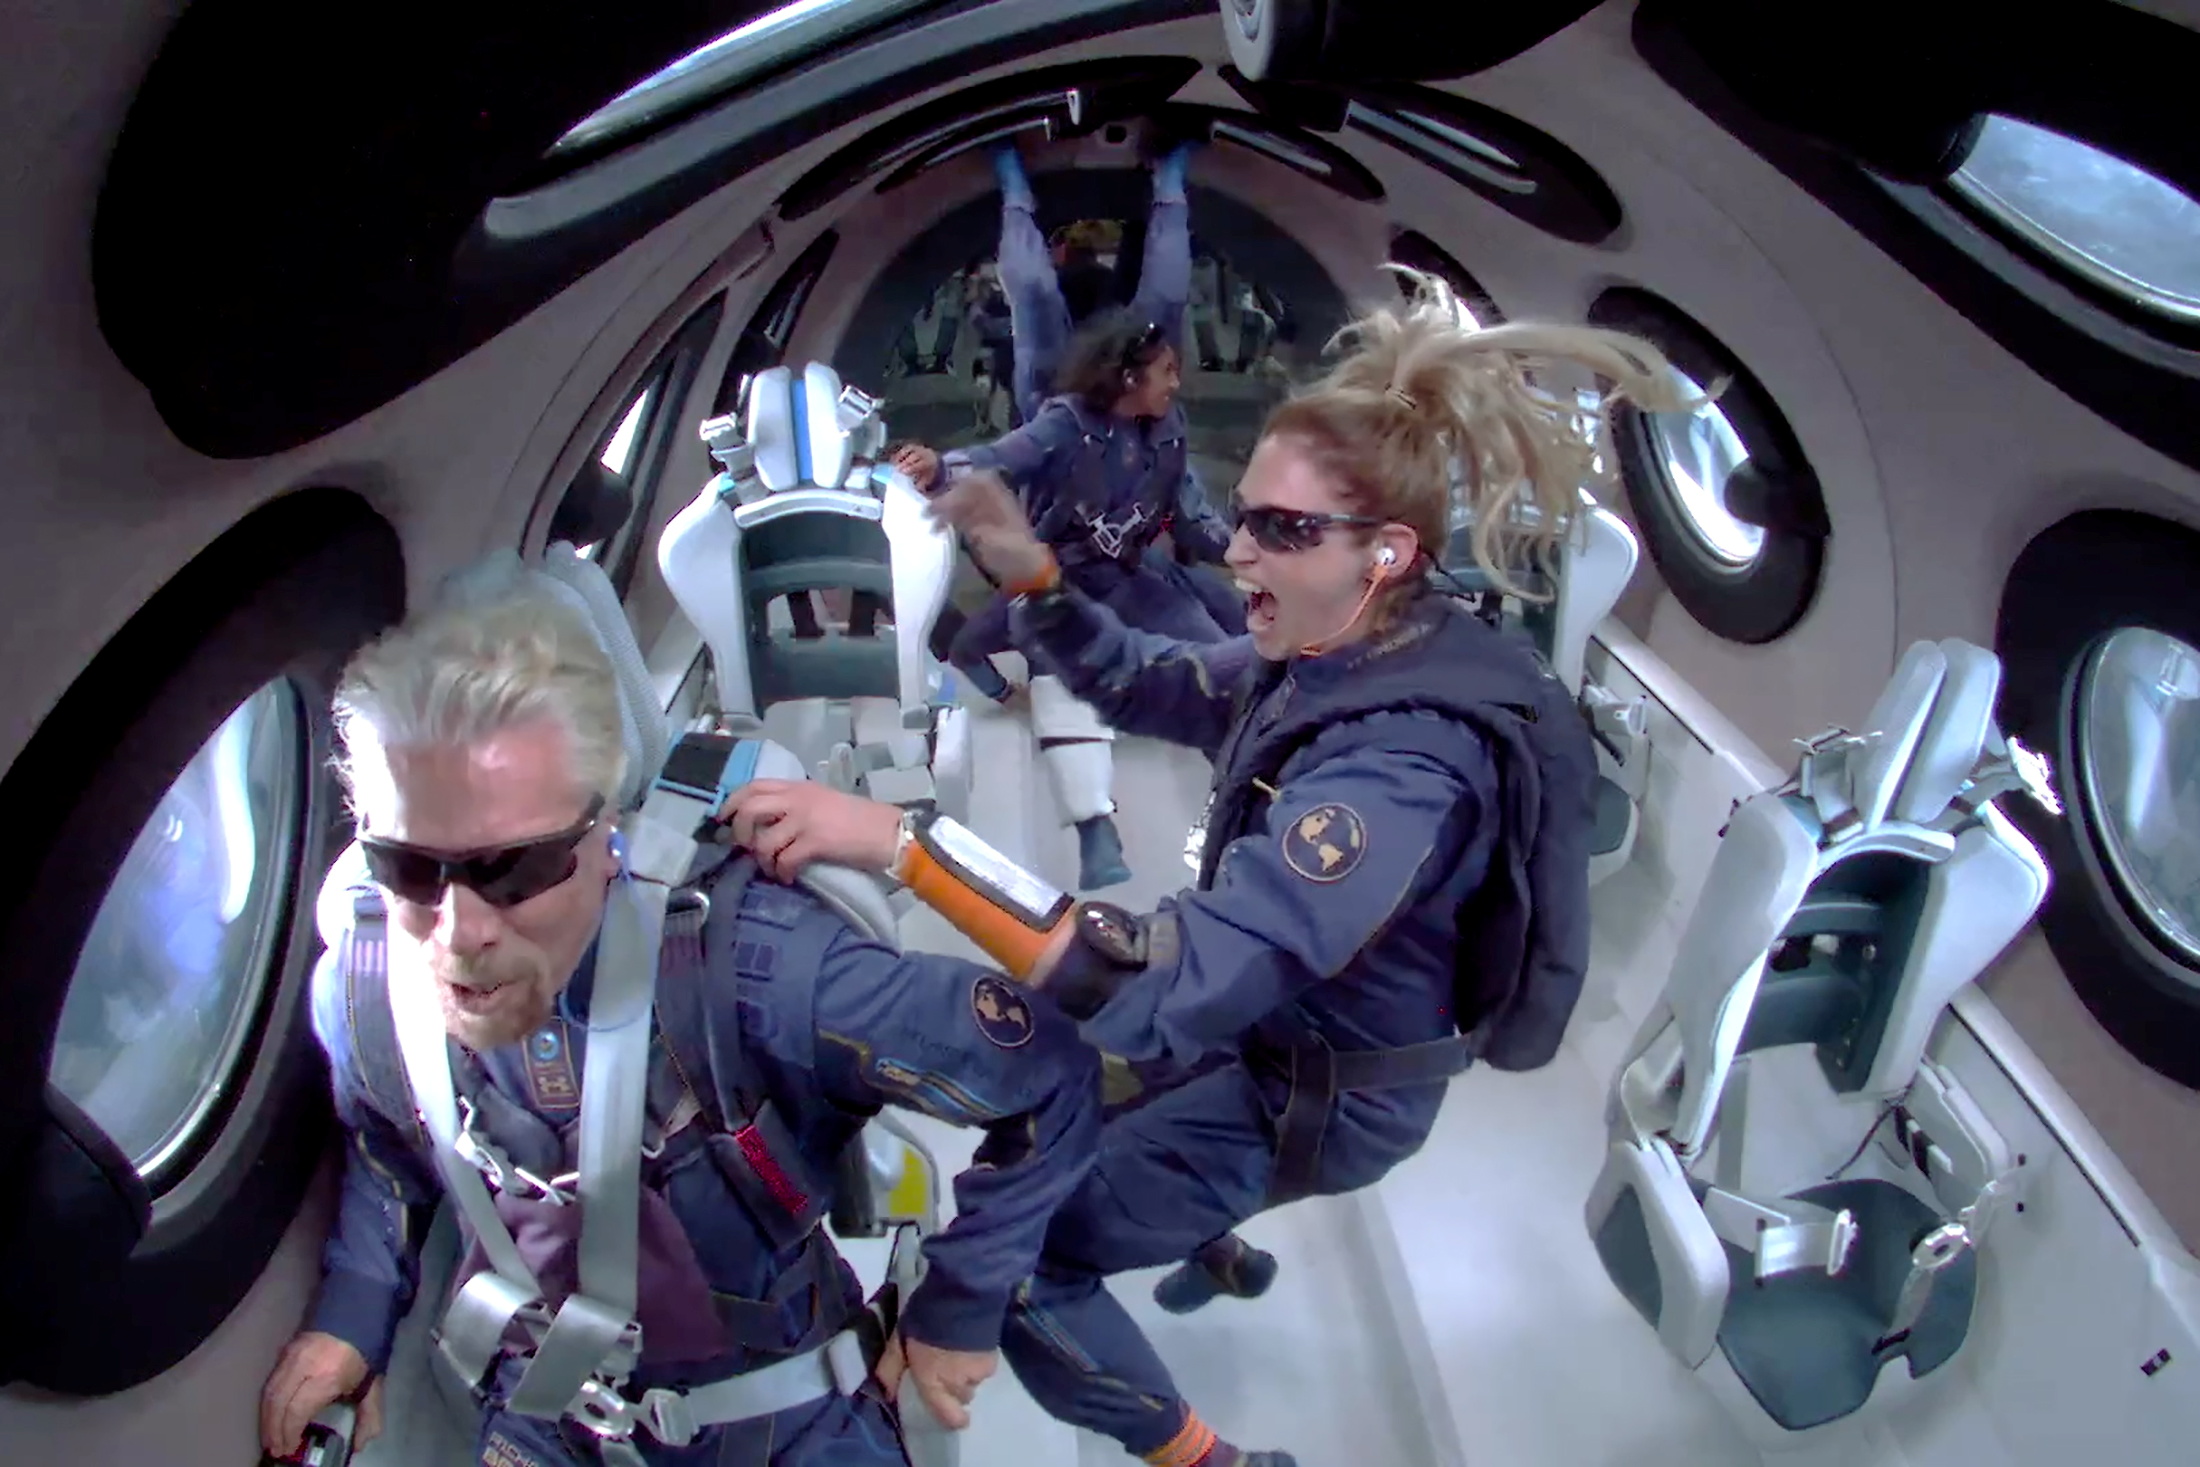 Billionaire Richard Branson makes a statement as crew members Beth Moses and Sirisha Bandla float in zero gravity on board Virgin Galactic's passenger rocket plane VSS Unity after reaching the edge of space above Spaceport America near Truth or Consequences, New Mexico, U.S. July 11, 2021 in a still image from video. Virgin Galactic/Handout via REUTERS